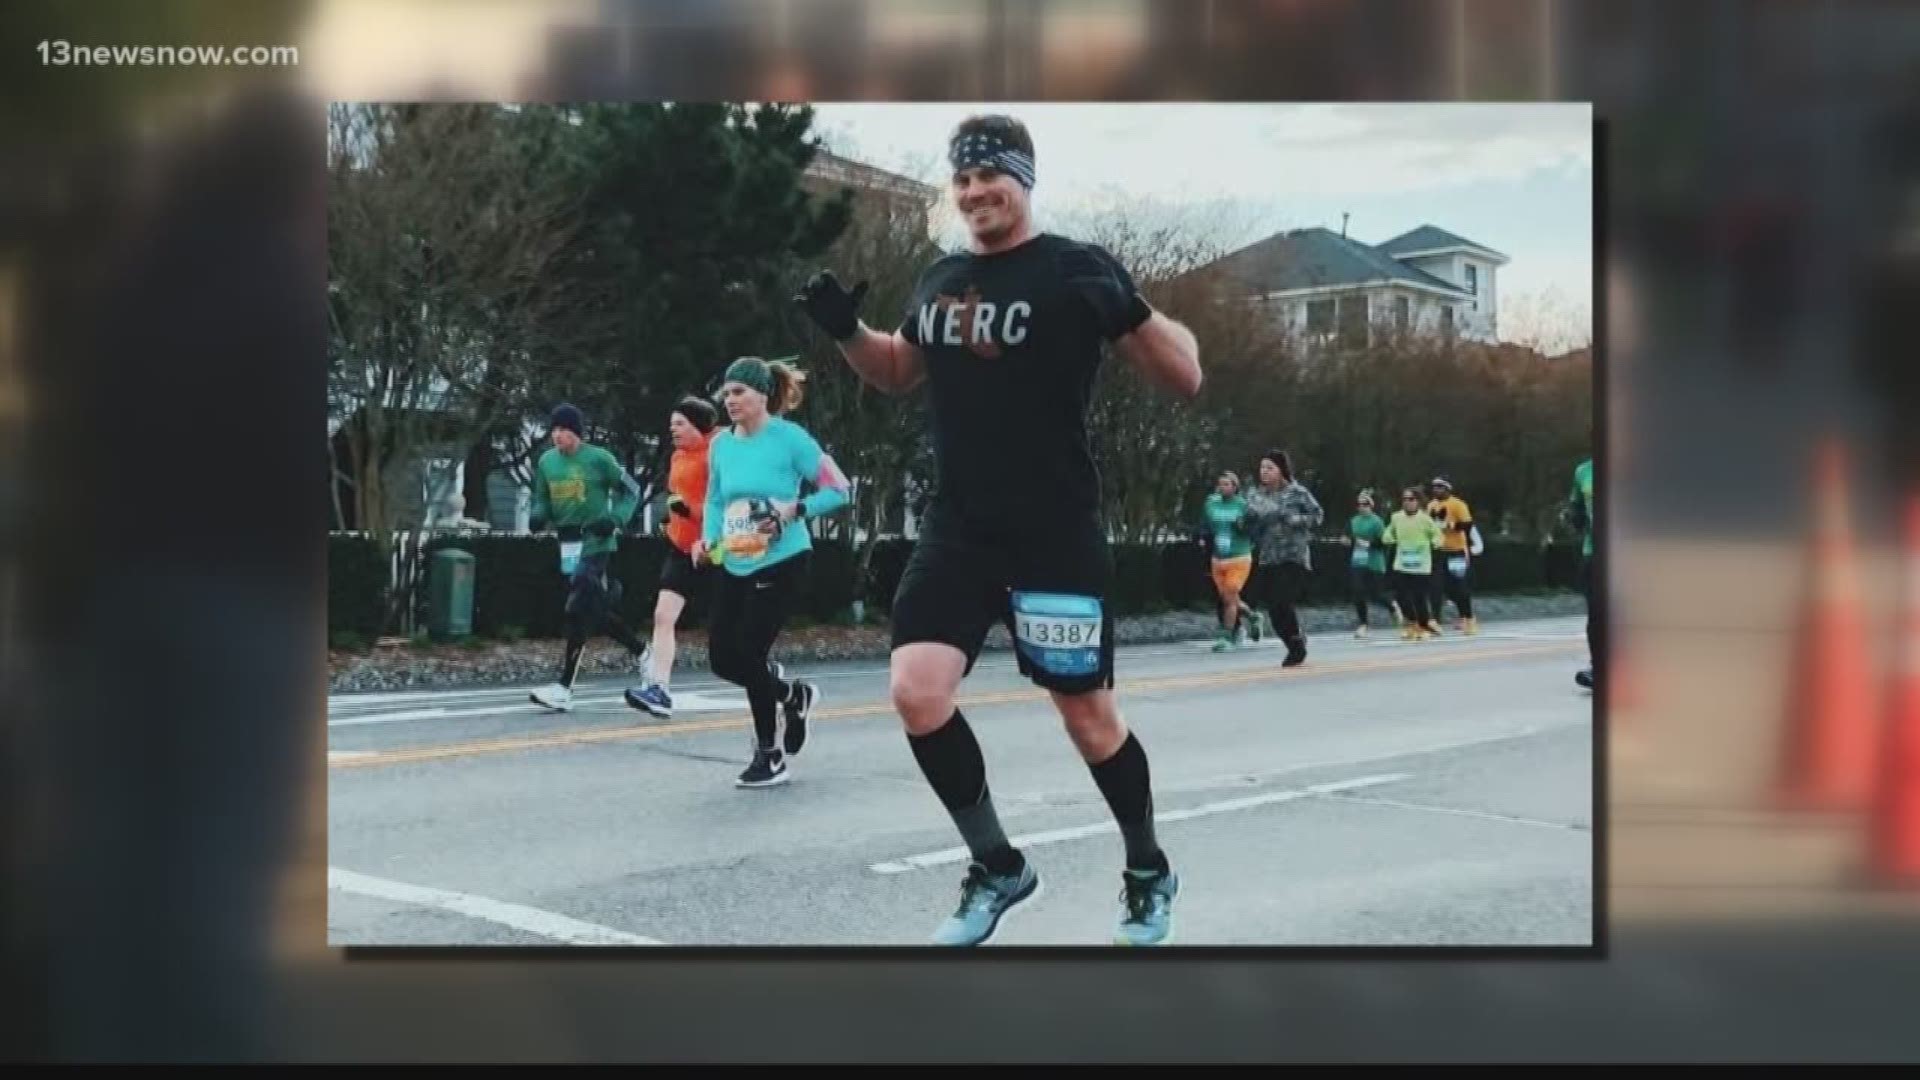 A runner is recovering after he collapsed near the finish line of the Shamrock Half Marathon in Virginia Beach